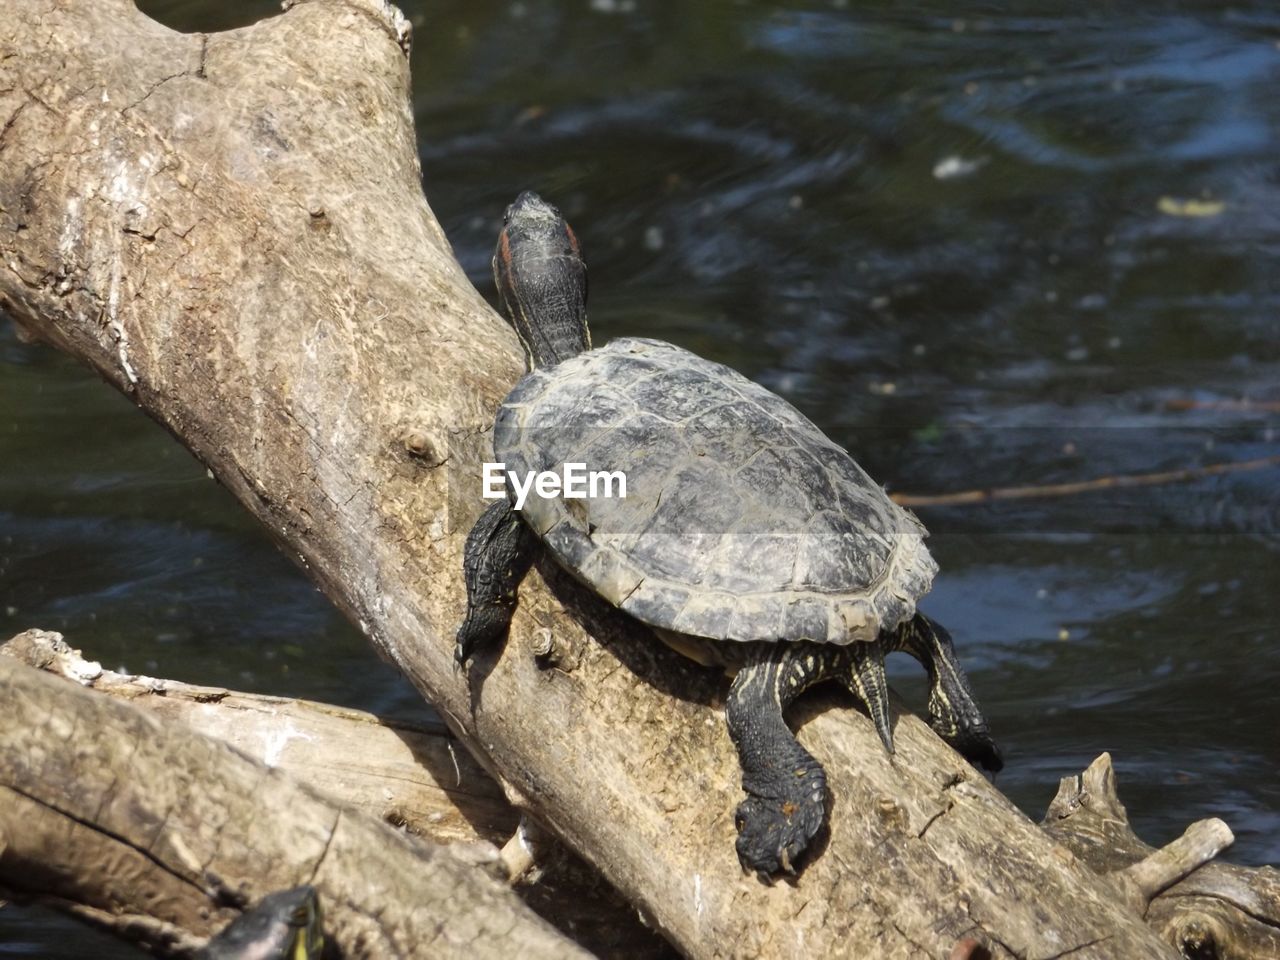 Close-up of turtle on fallen tree